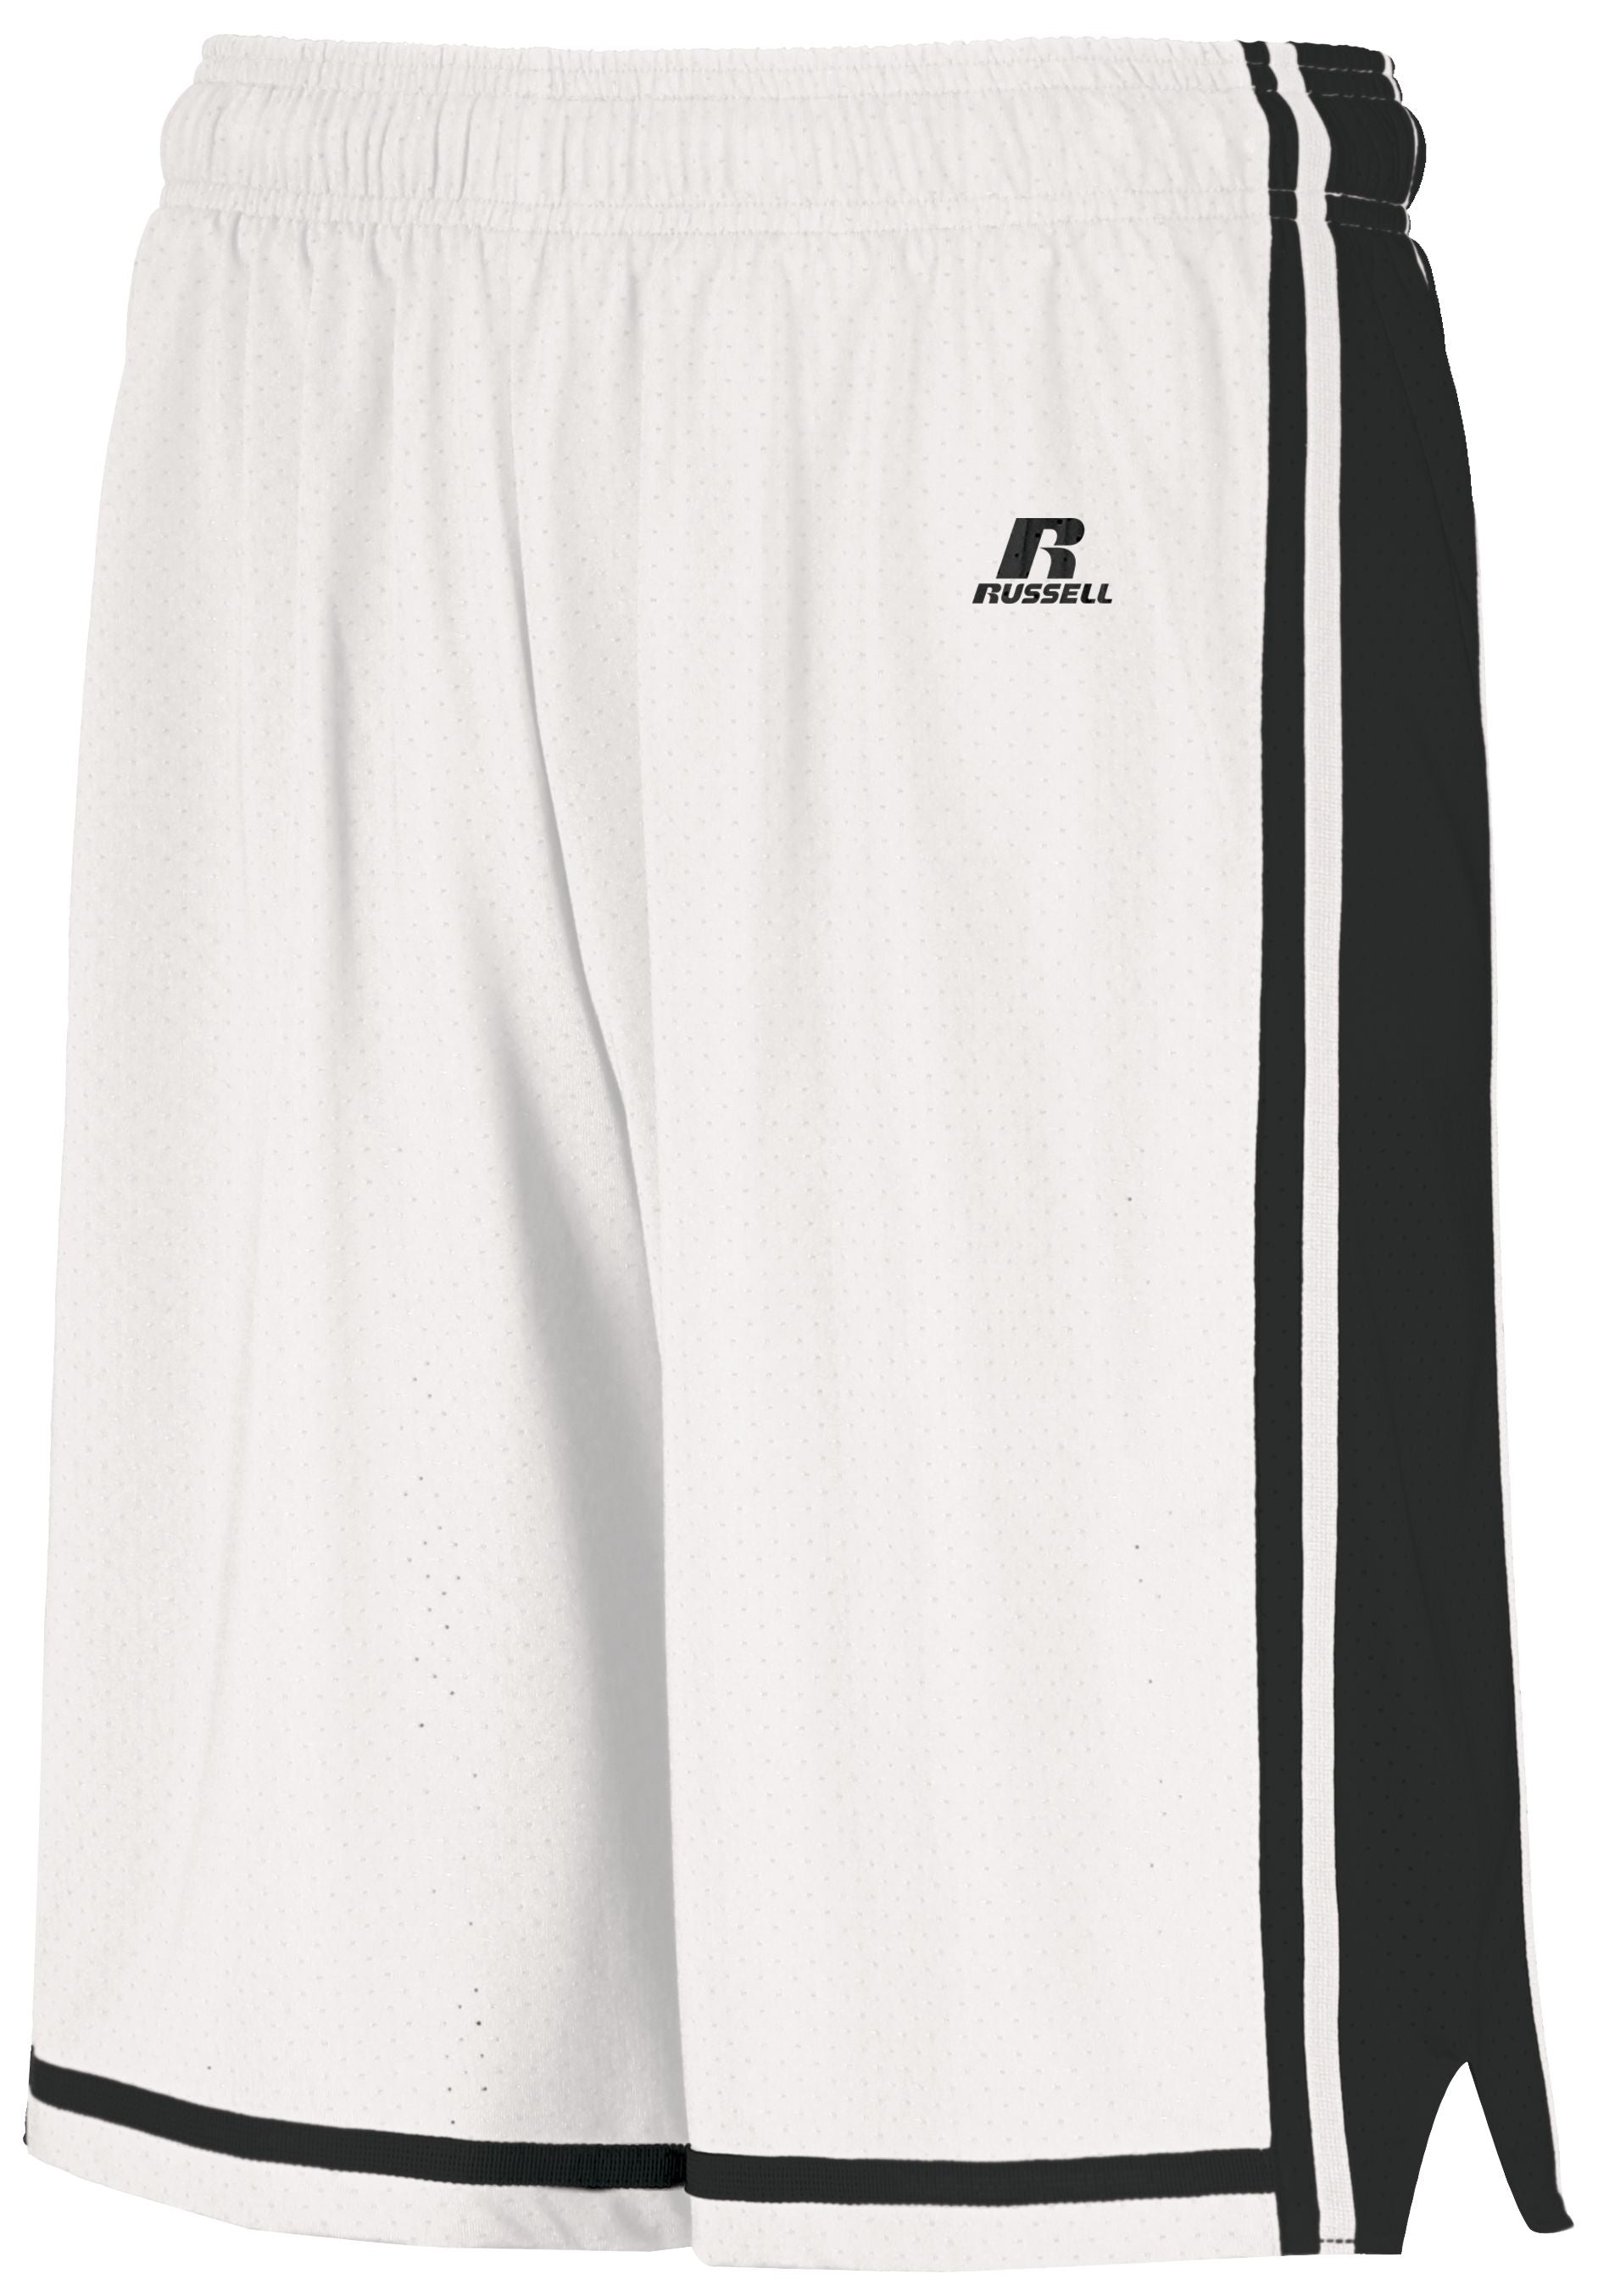 Russell Athletic Legacy Basketball Shorts in White/Black  -Part of the Adult, Adult-Shorts, Basketball, Russell-Athletic-Products, All-Sports, All-Sports-1 product lines at KanaleyCreations.com